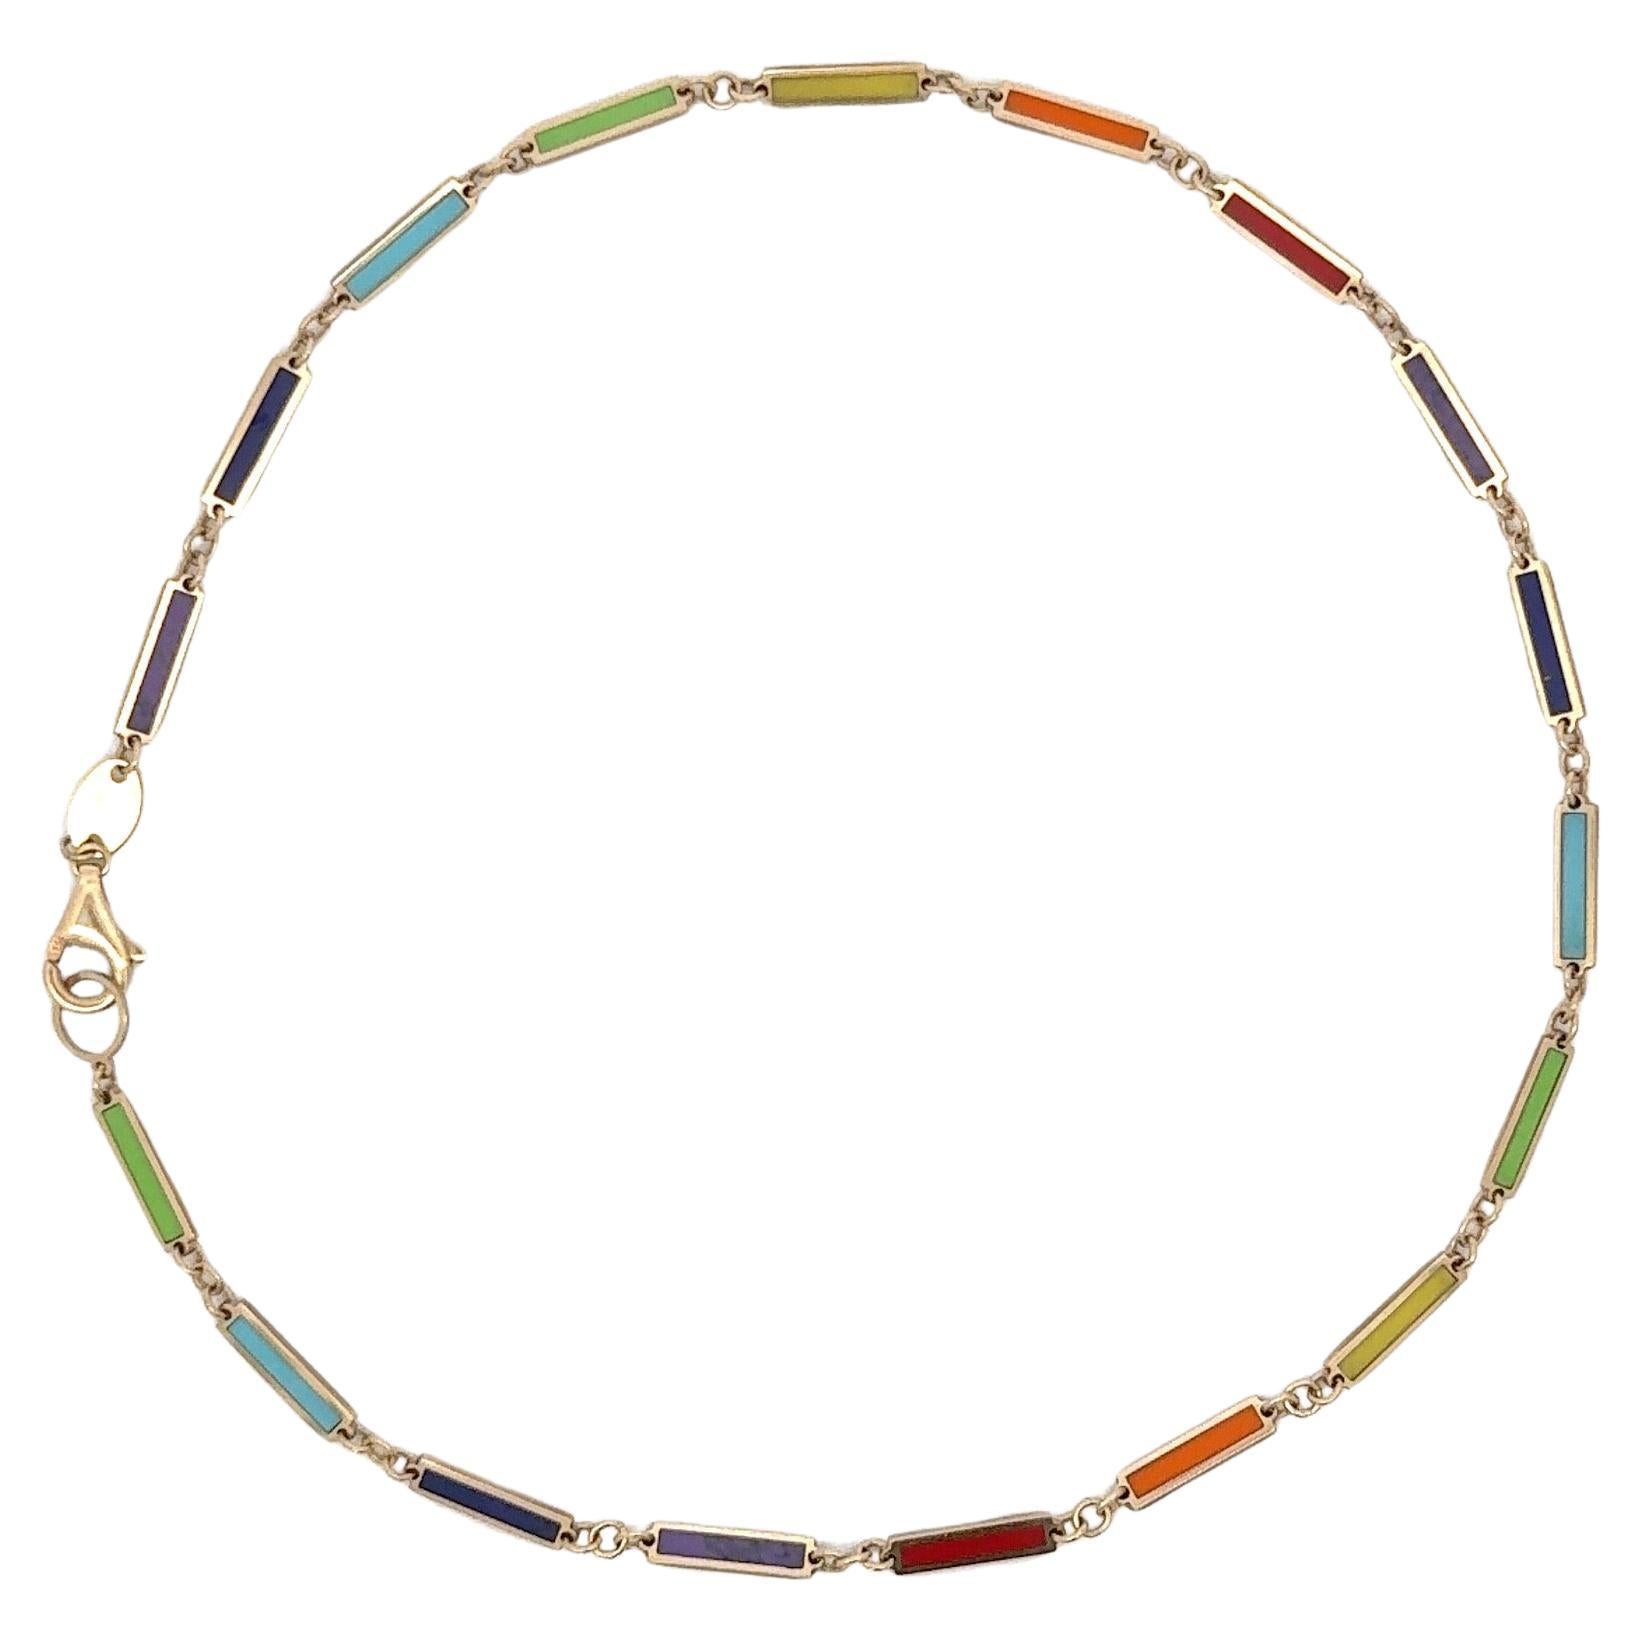 Italian made, this 14 karat yellow gold anklet bracelet features multi-color enamel bars weighing 2.7 grams.
Available in other colors & shapes.